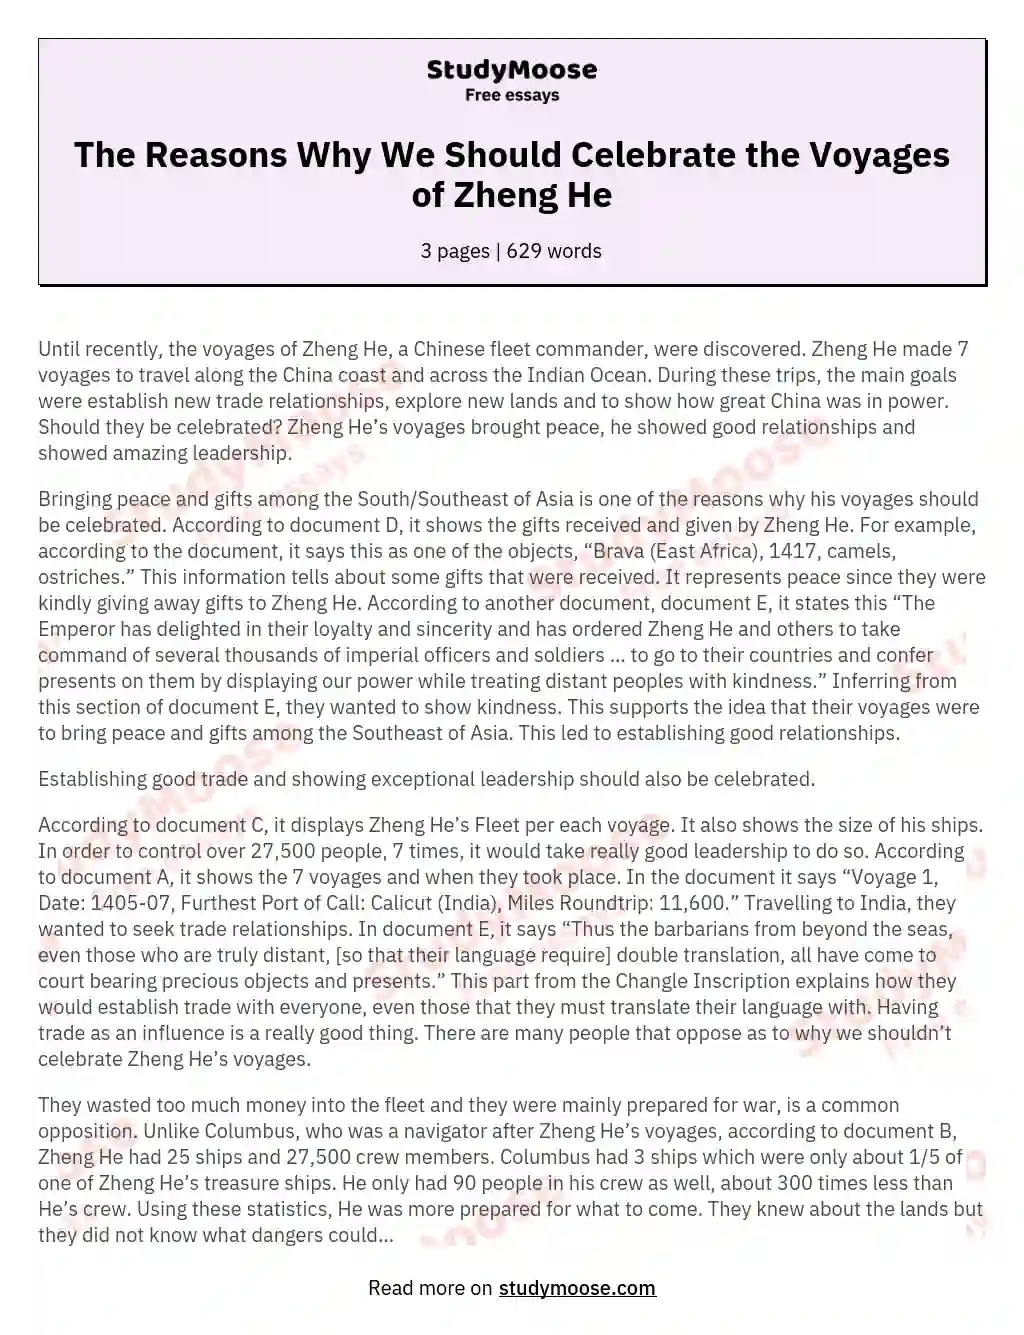 The Reasons Why We Should Celebrate the Voyages of Zheng He essay